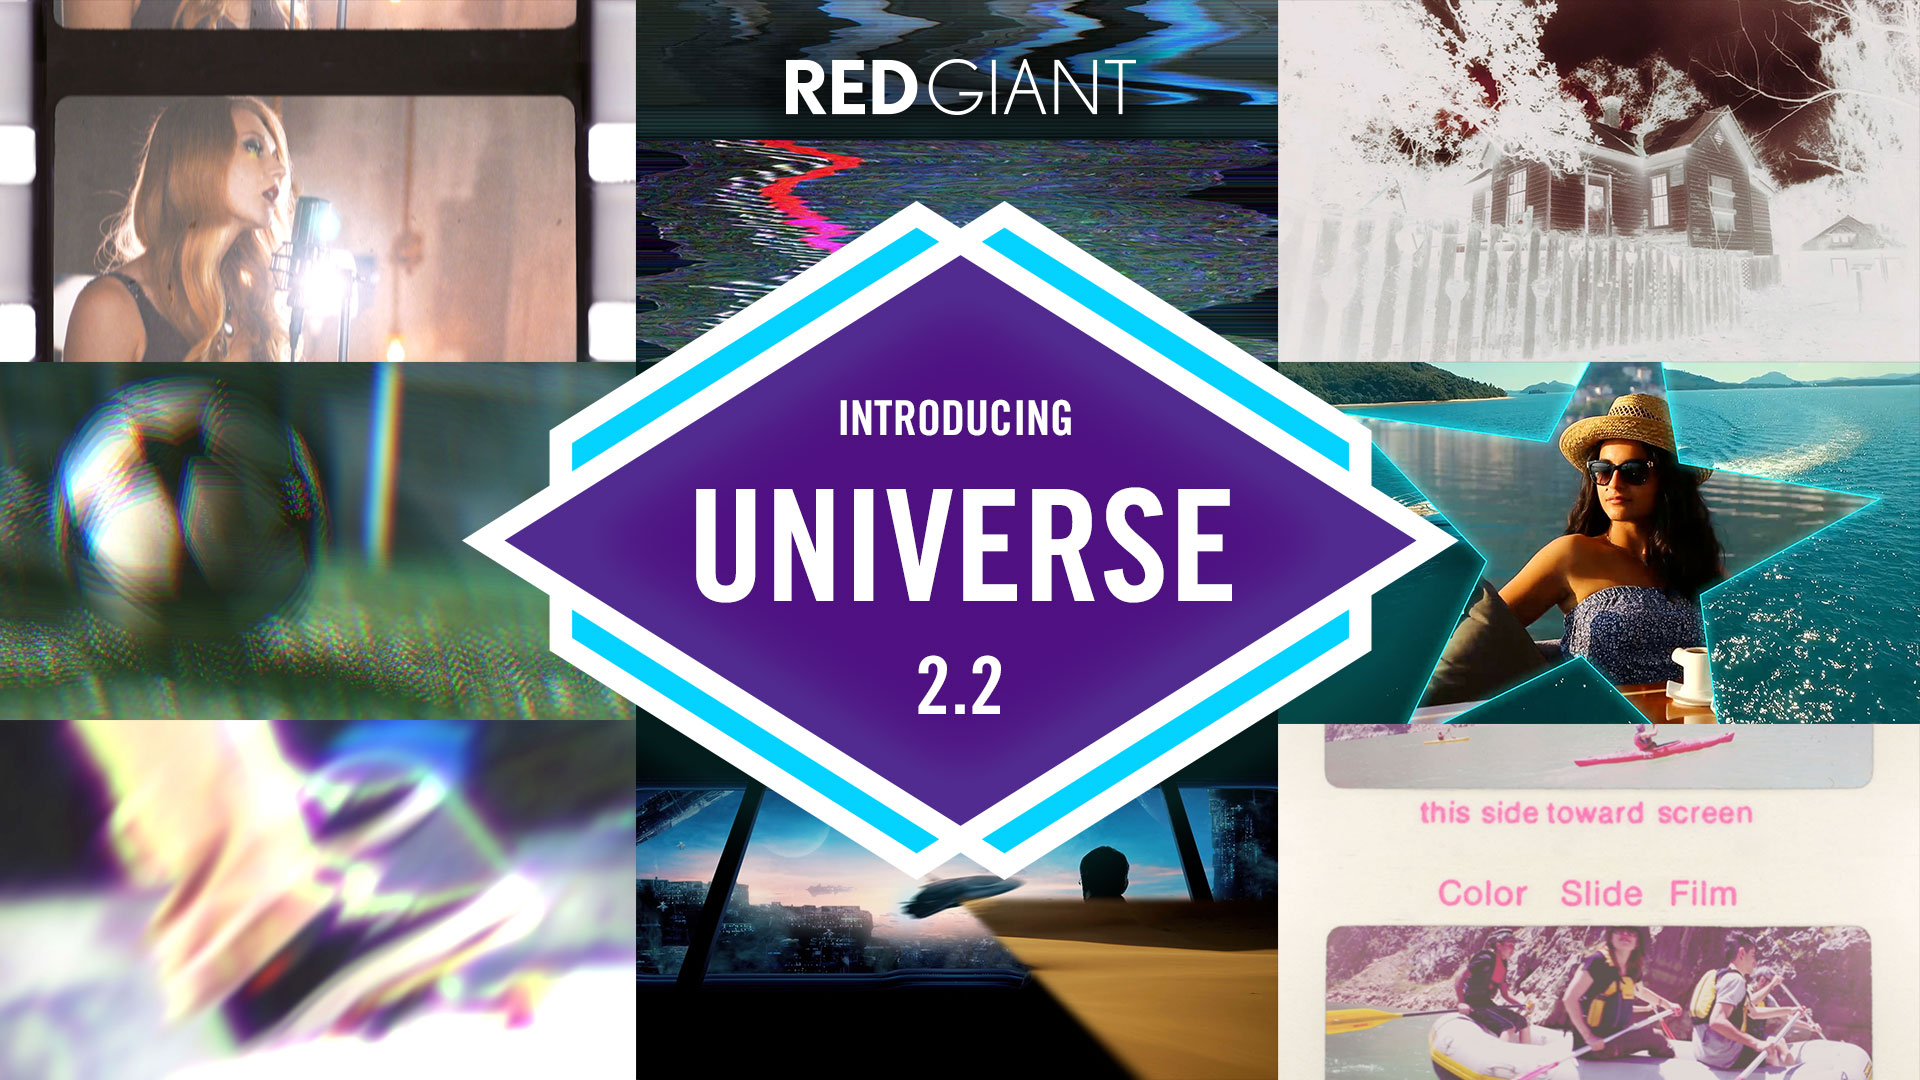 Red Giant Universe 2.2